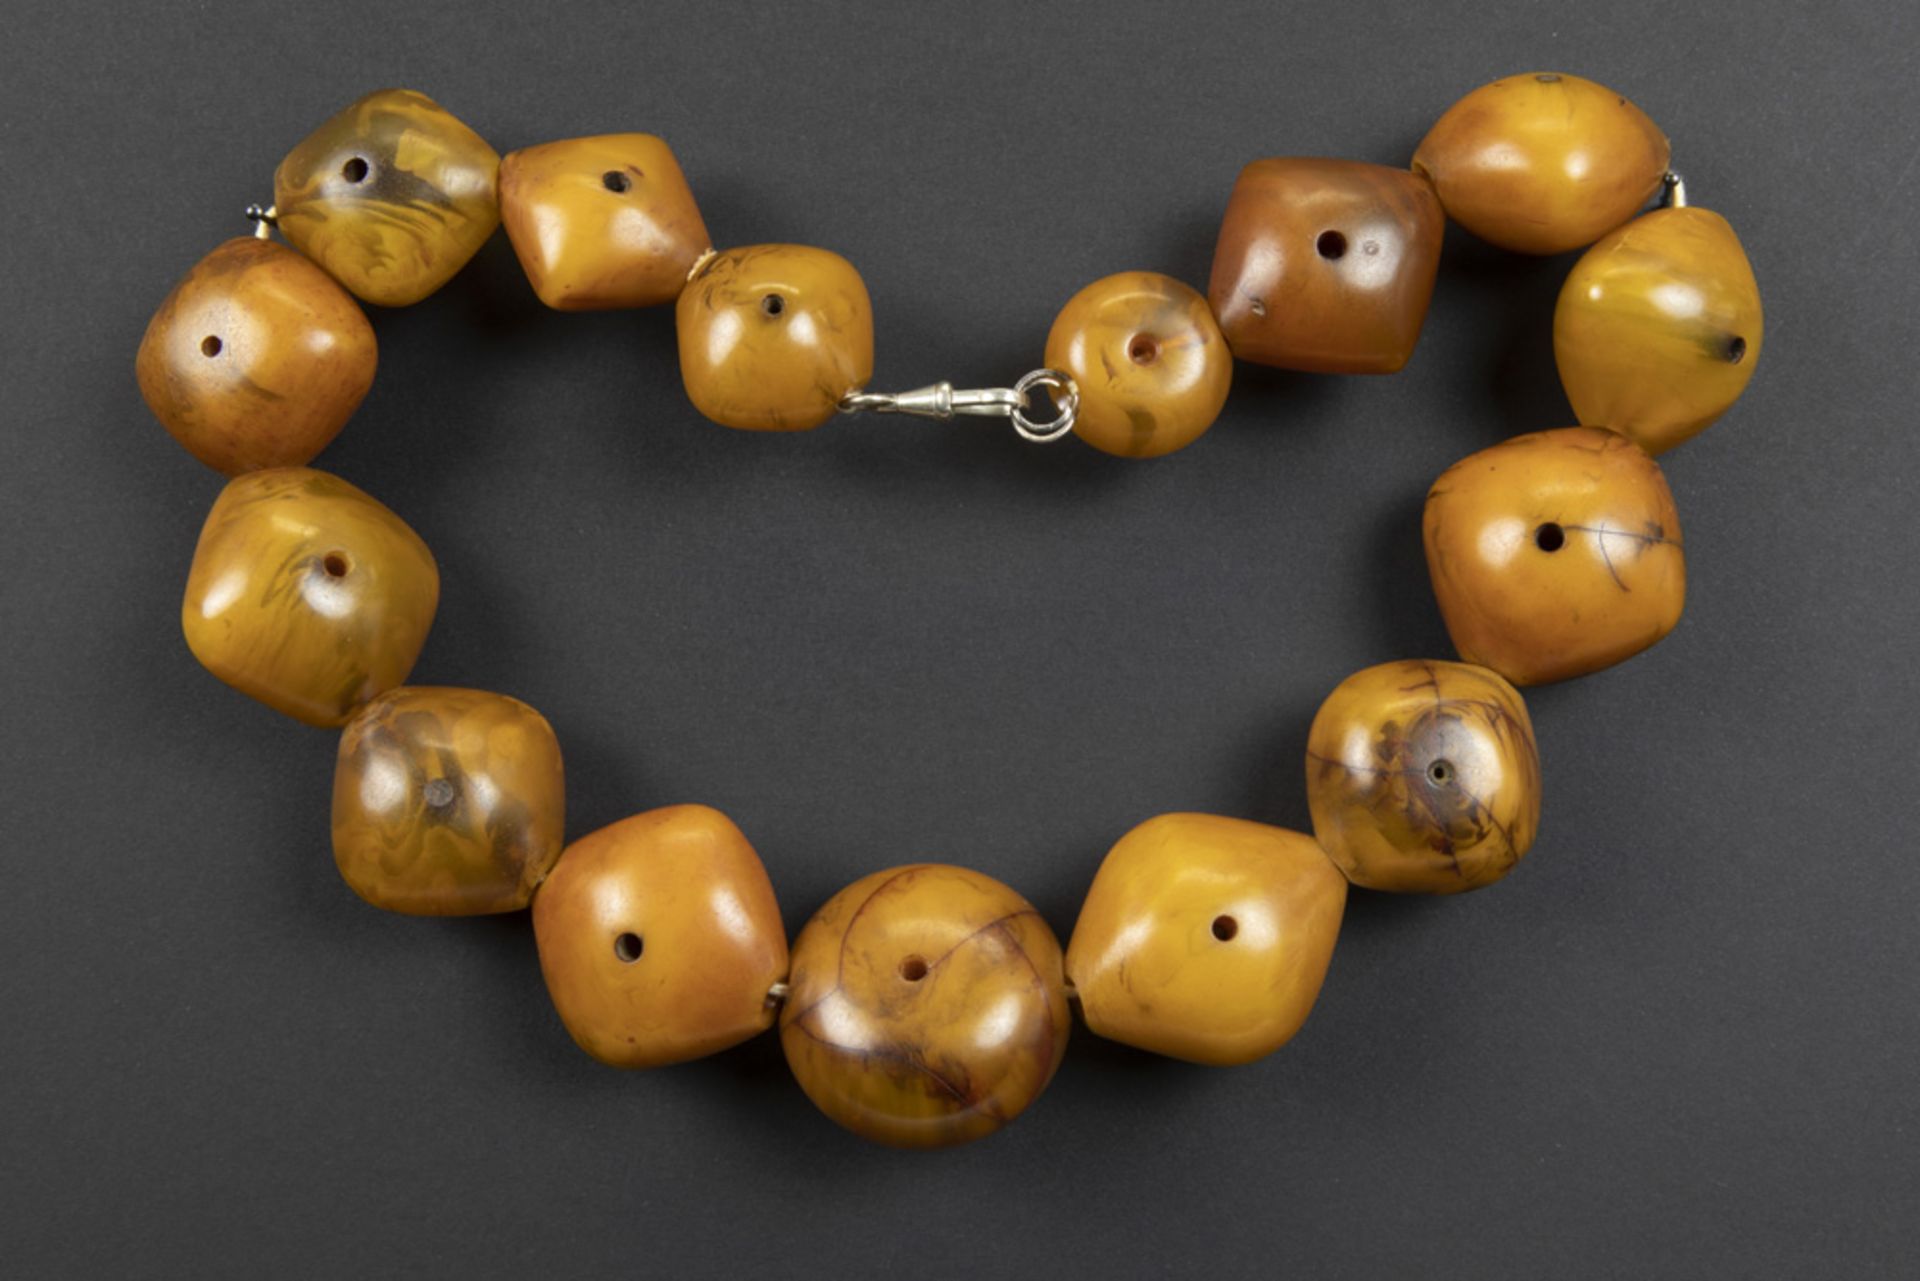 North African ethnic necklace or head ornament with beads in amber || Noord-Afrikaans etnisch